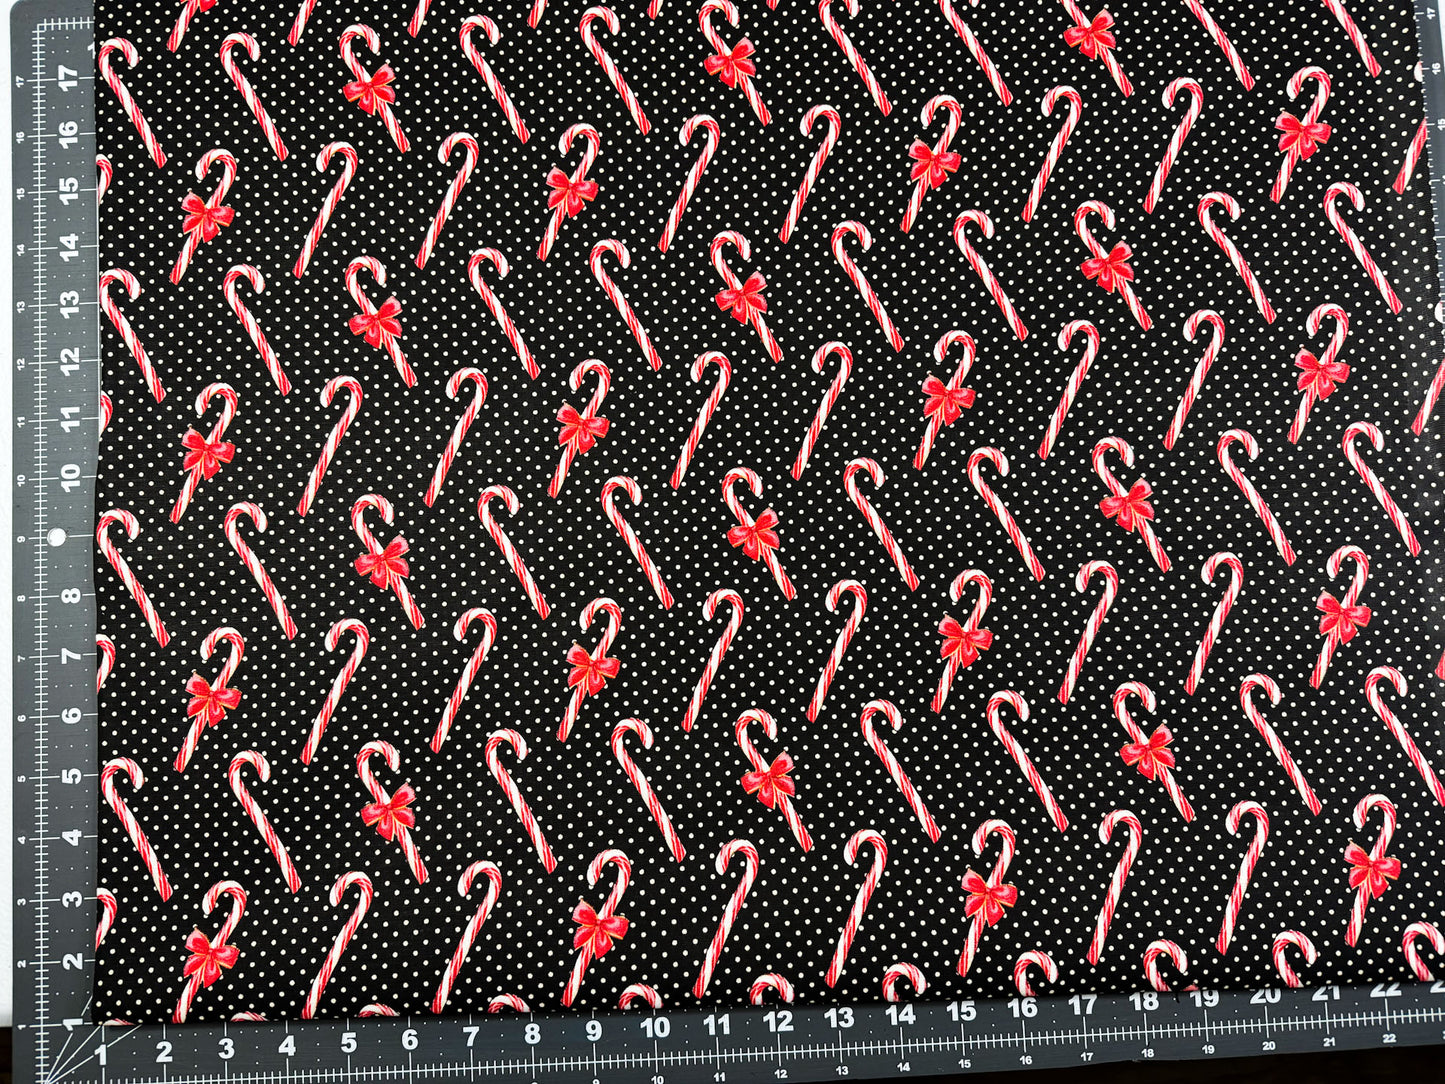 Christmas candy canes fabric 17919 candy cane cotton fabric